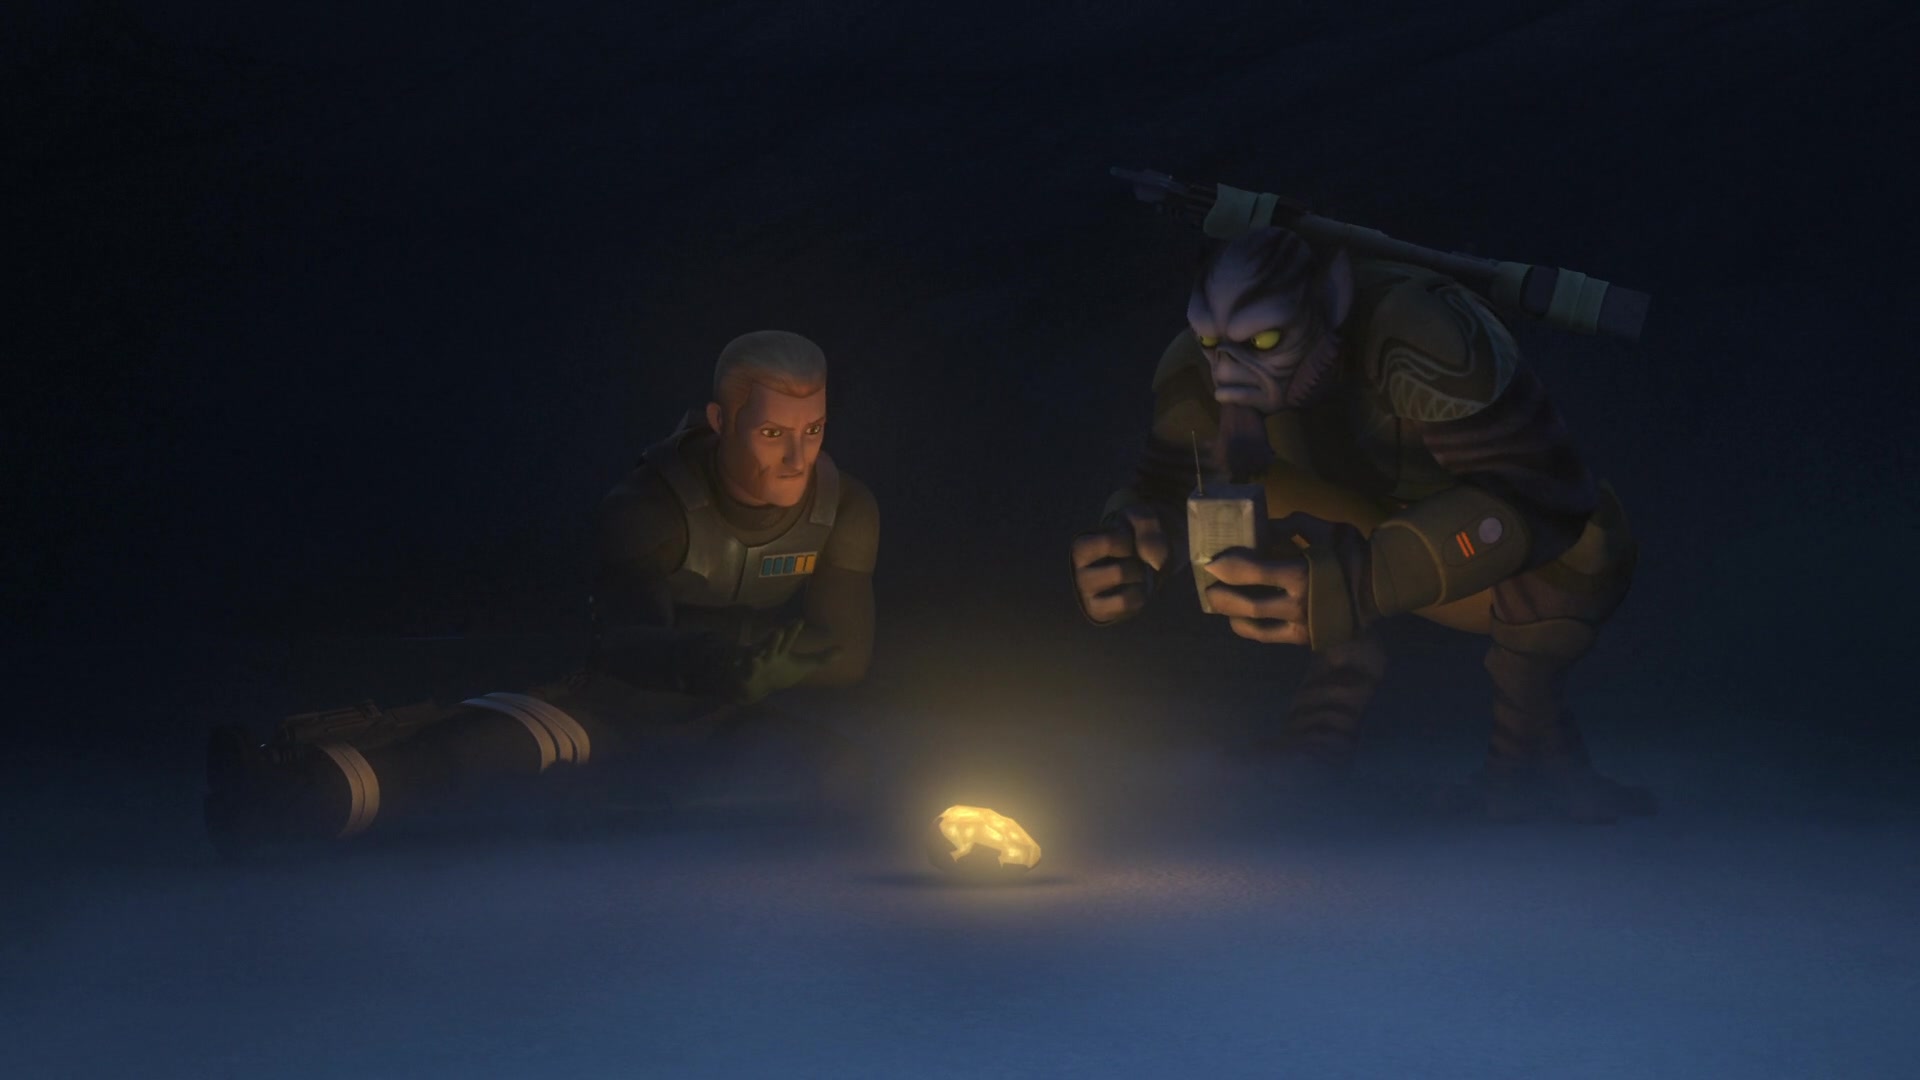 Zeb (Steve Blum) and Agent Kallus (David Oyelowo) attempt to keep warm in Star Wars Rebels Season 2 Episode 17 "The Honorable Ones" (2016), Lucasfilm